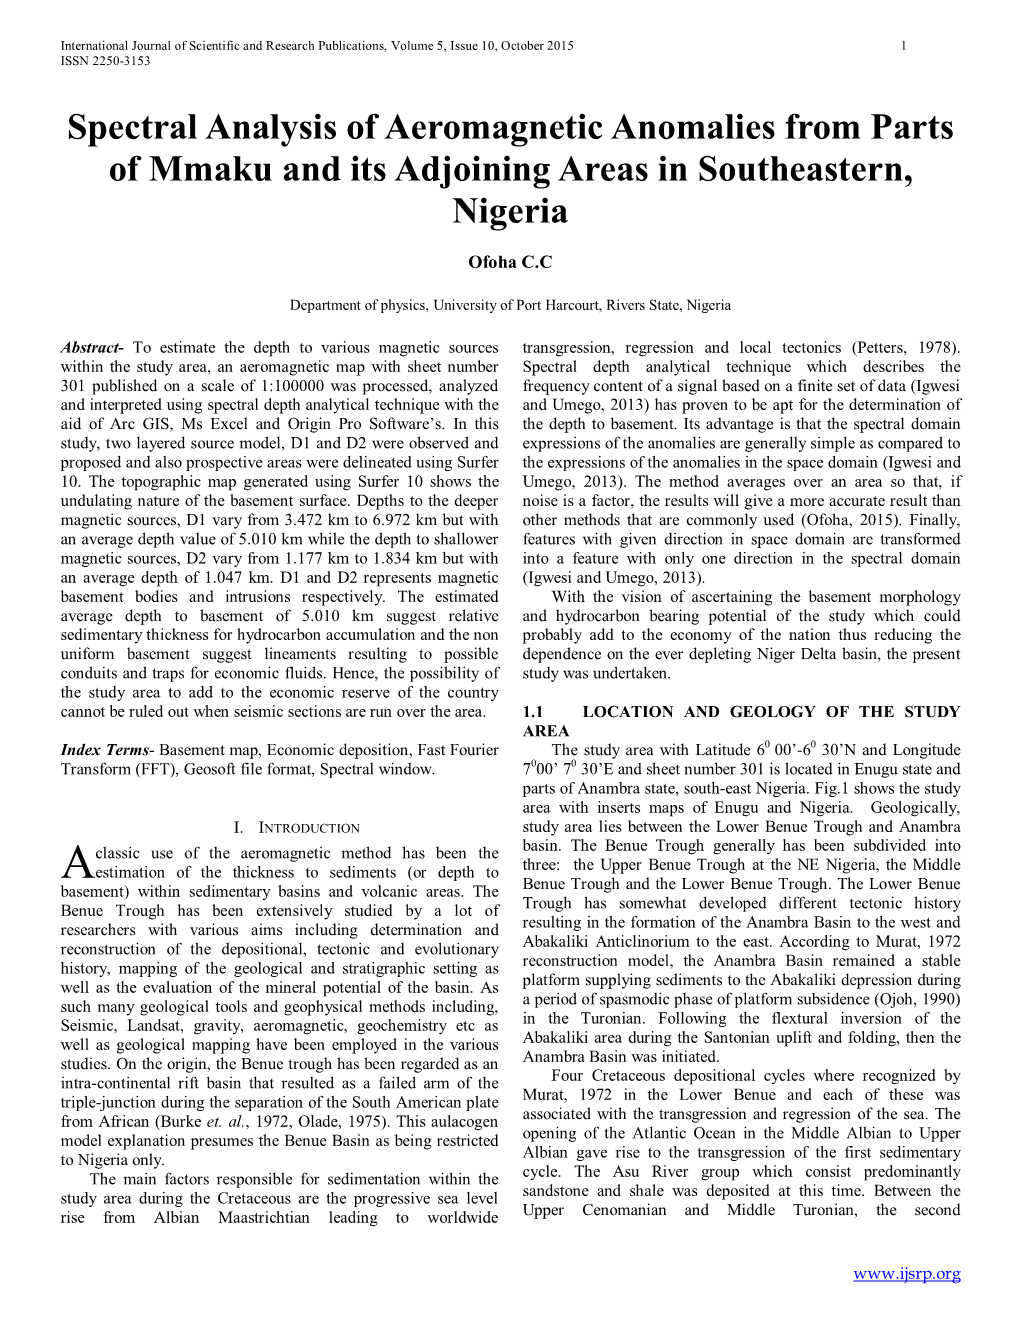 Spectral Analysis of Aeromagnetic Anomalies from Parts of Mmaku and Its Adjoining Areas in Southeastern, Nigeria